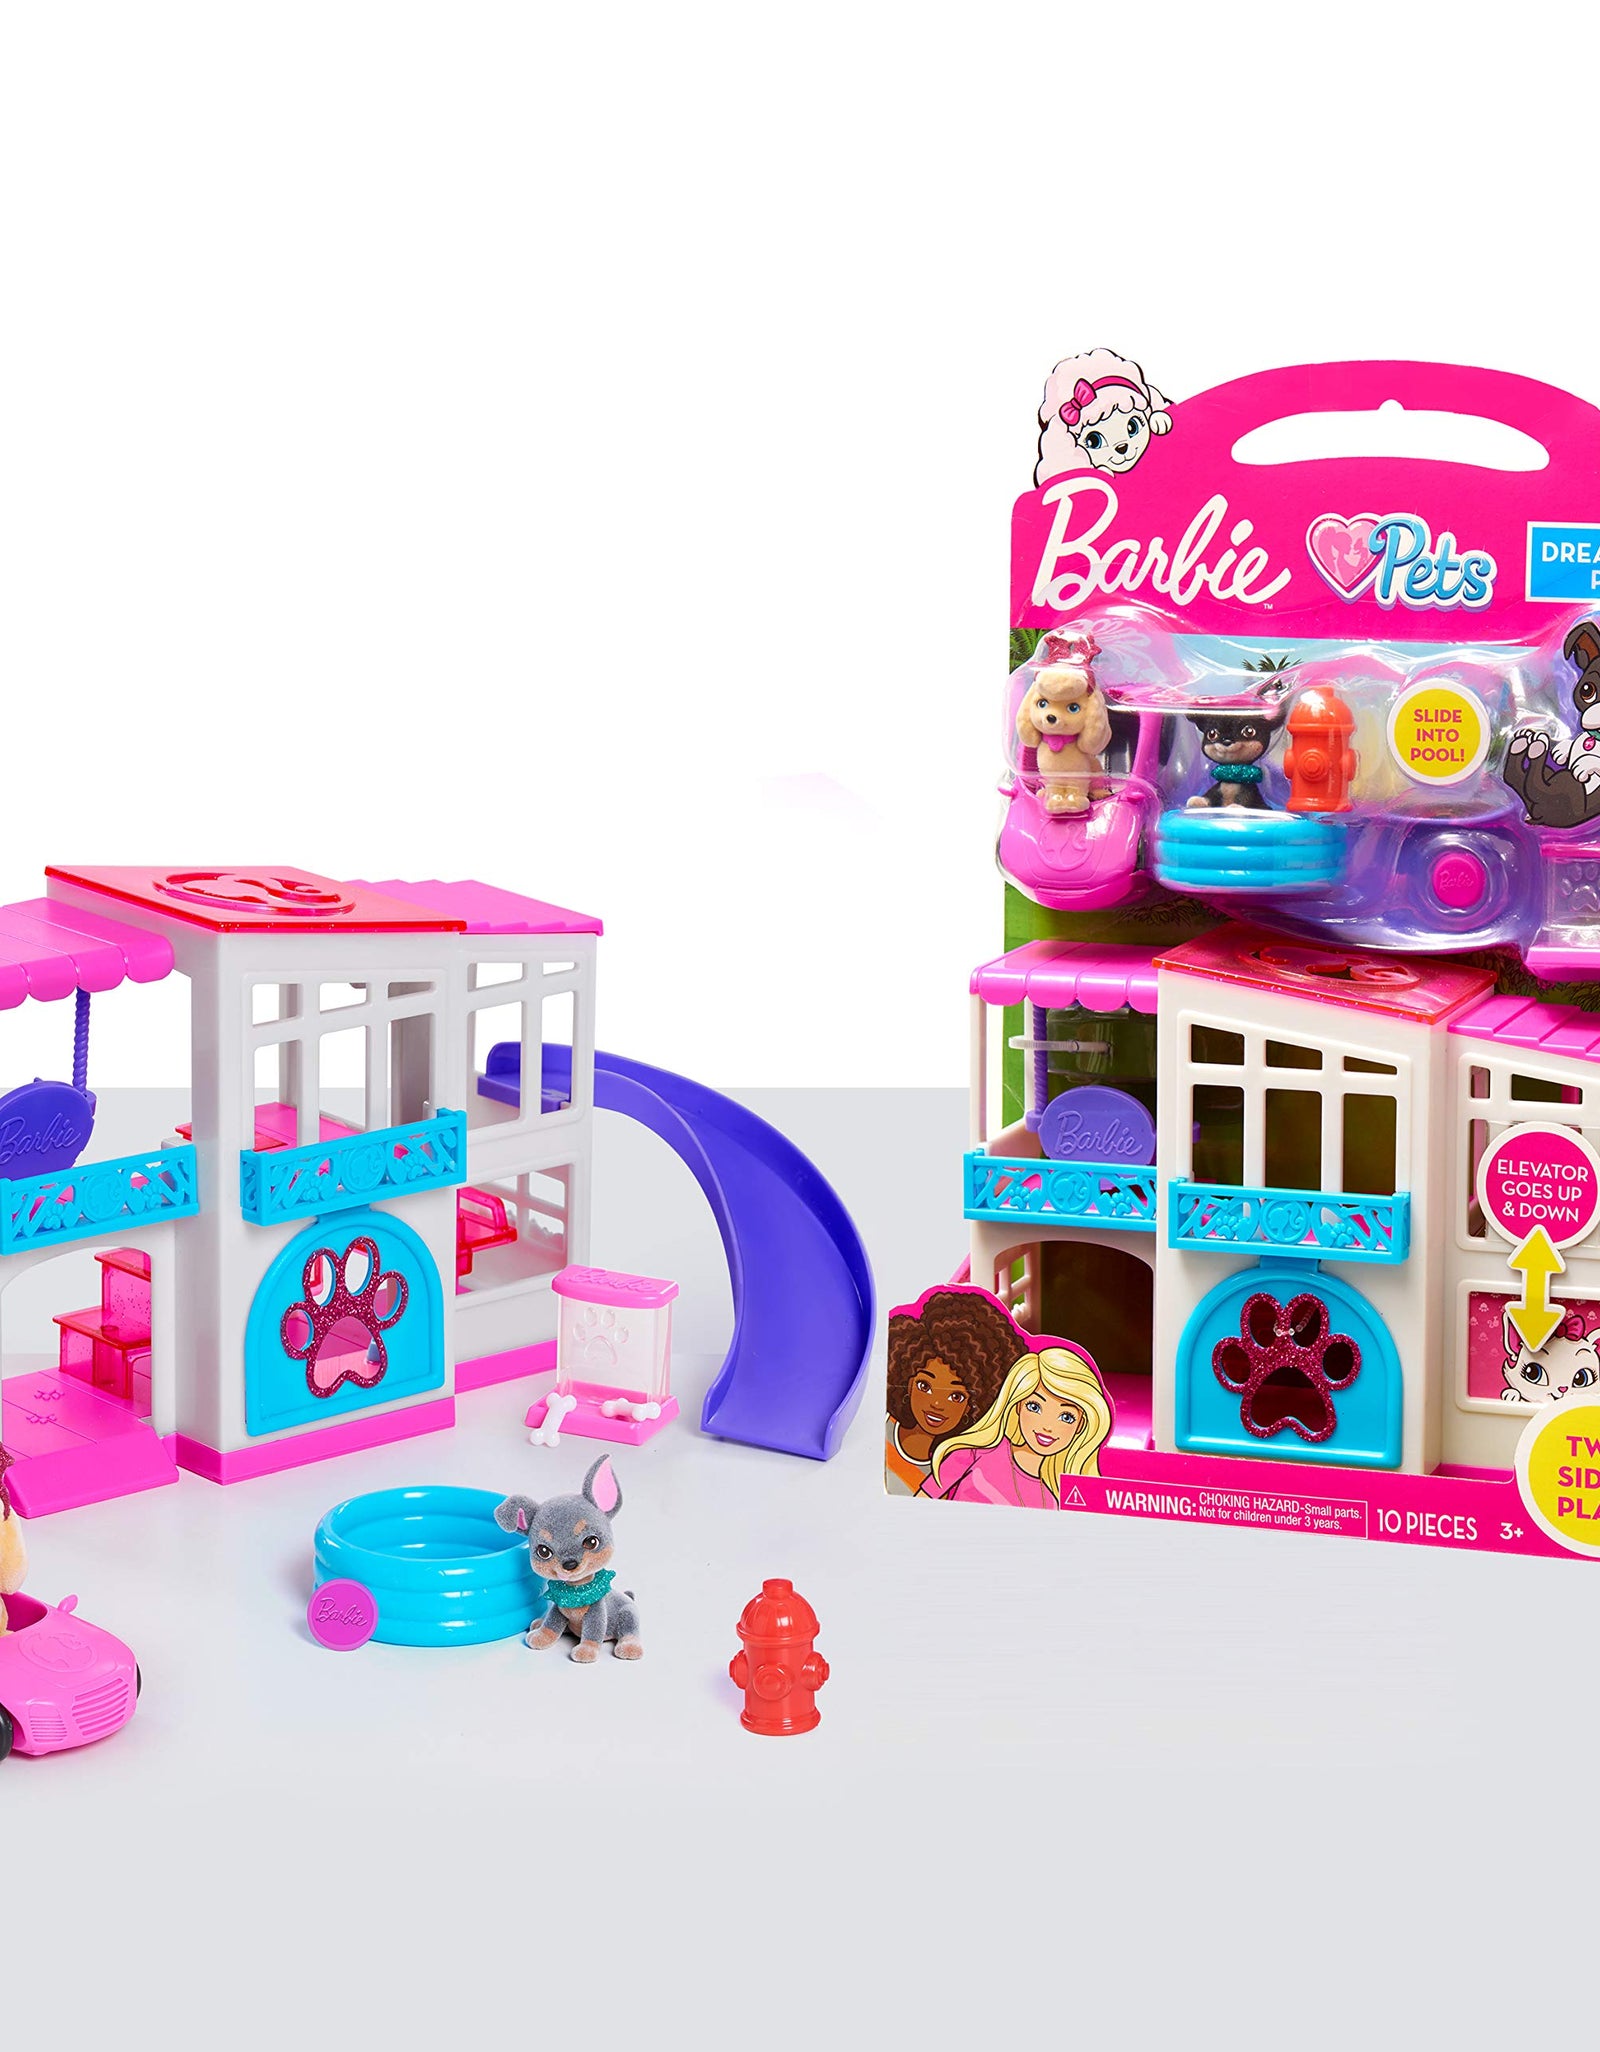 Barbie Pet Dreamhouse 2-Sided Playset, 10-pieces Include Pets and Accessories, by Just Play